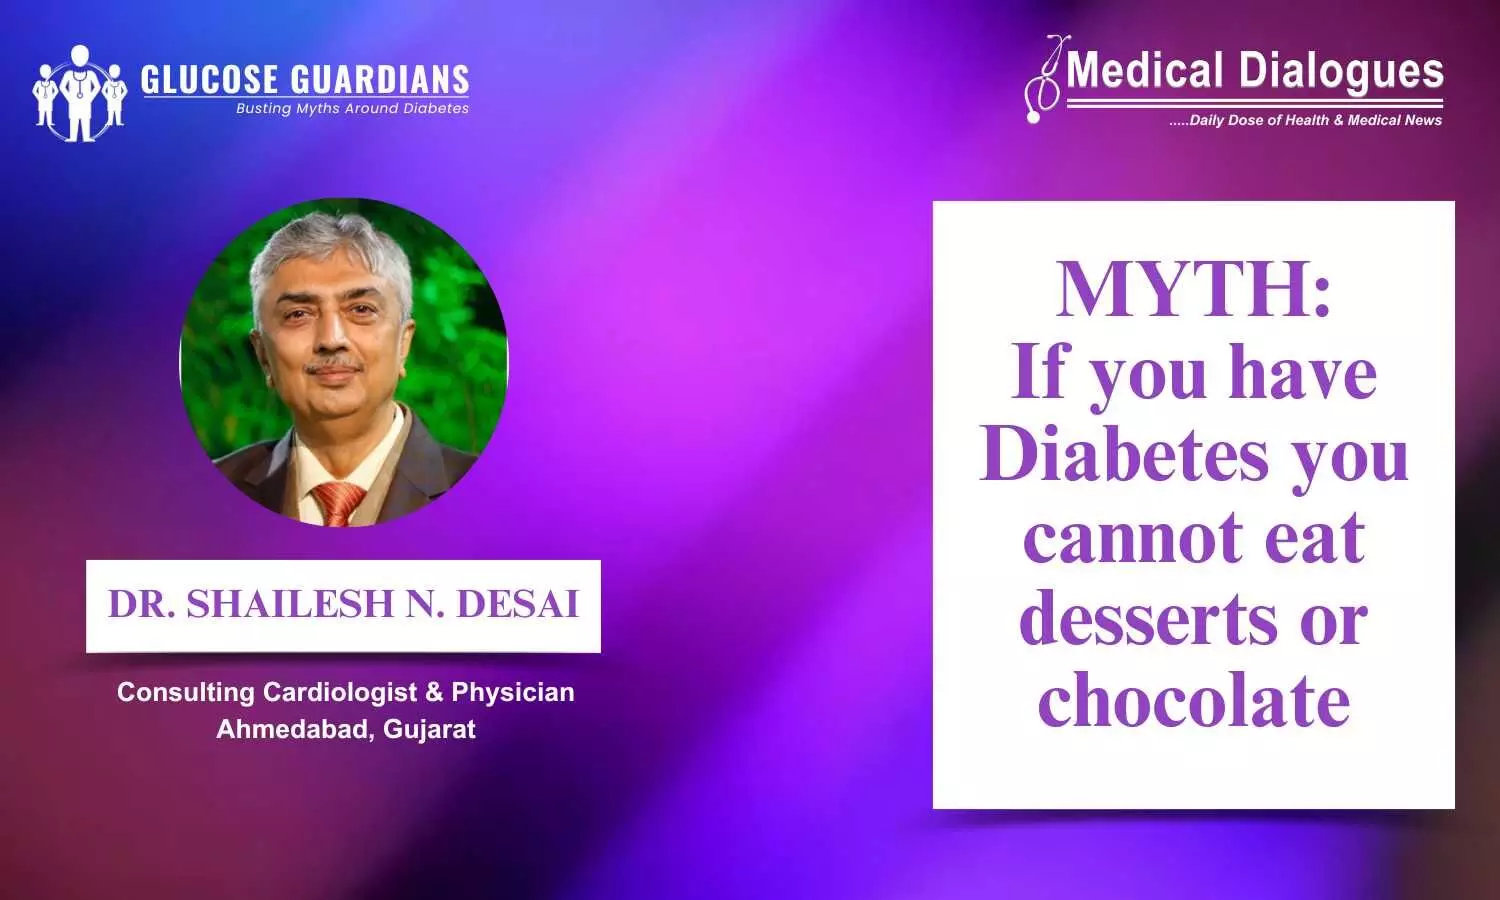 Misconceptions related to eating Desserts and chocolate in Diabetes - Dr Shailesh N. Desai